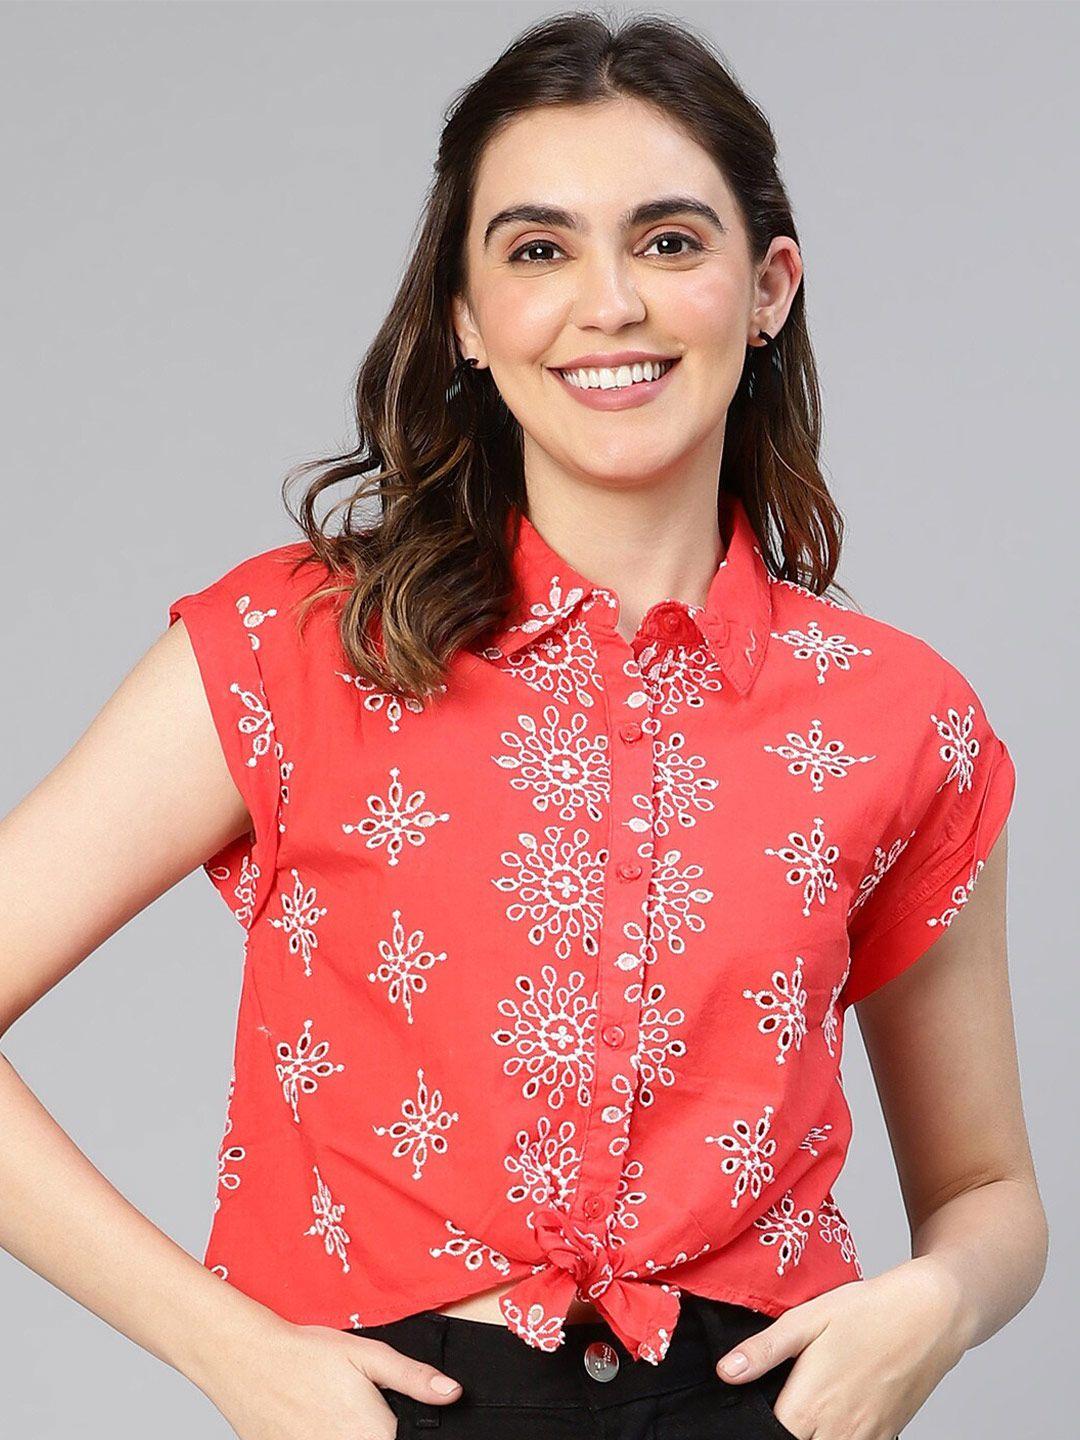 oxolloxo ethnic motifs printed cotton shirt style top